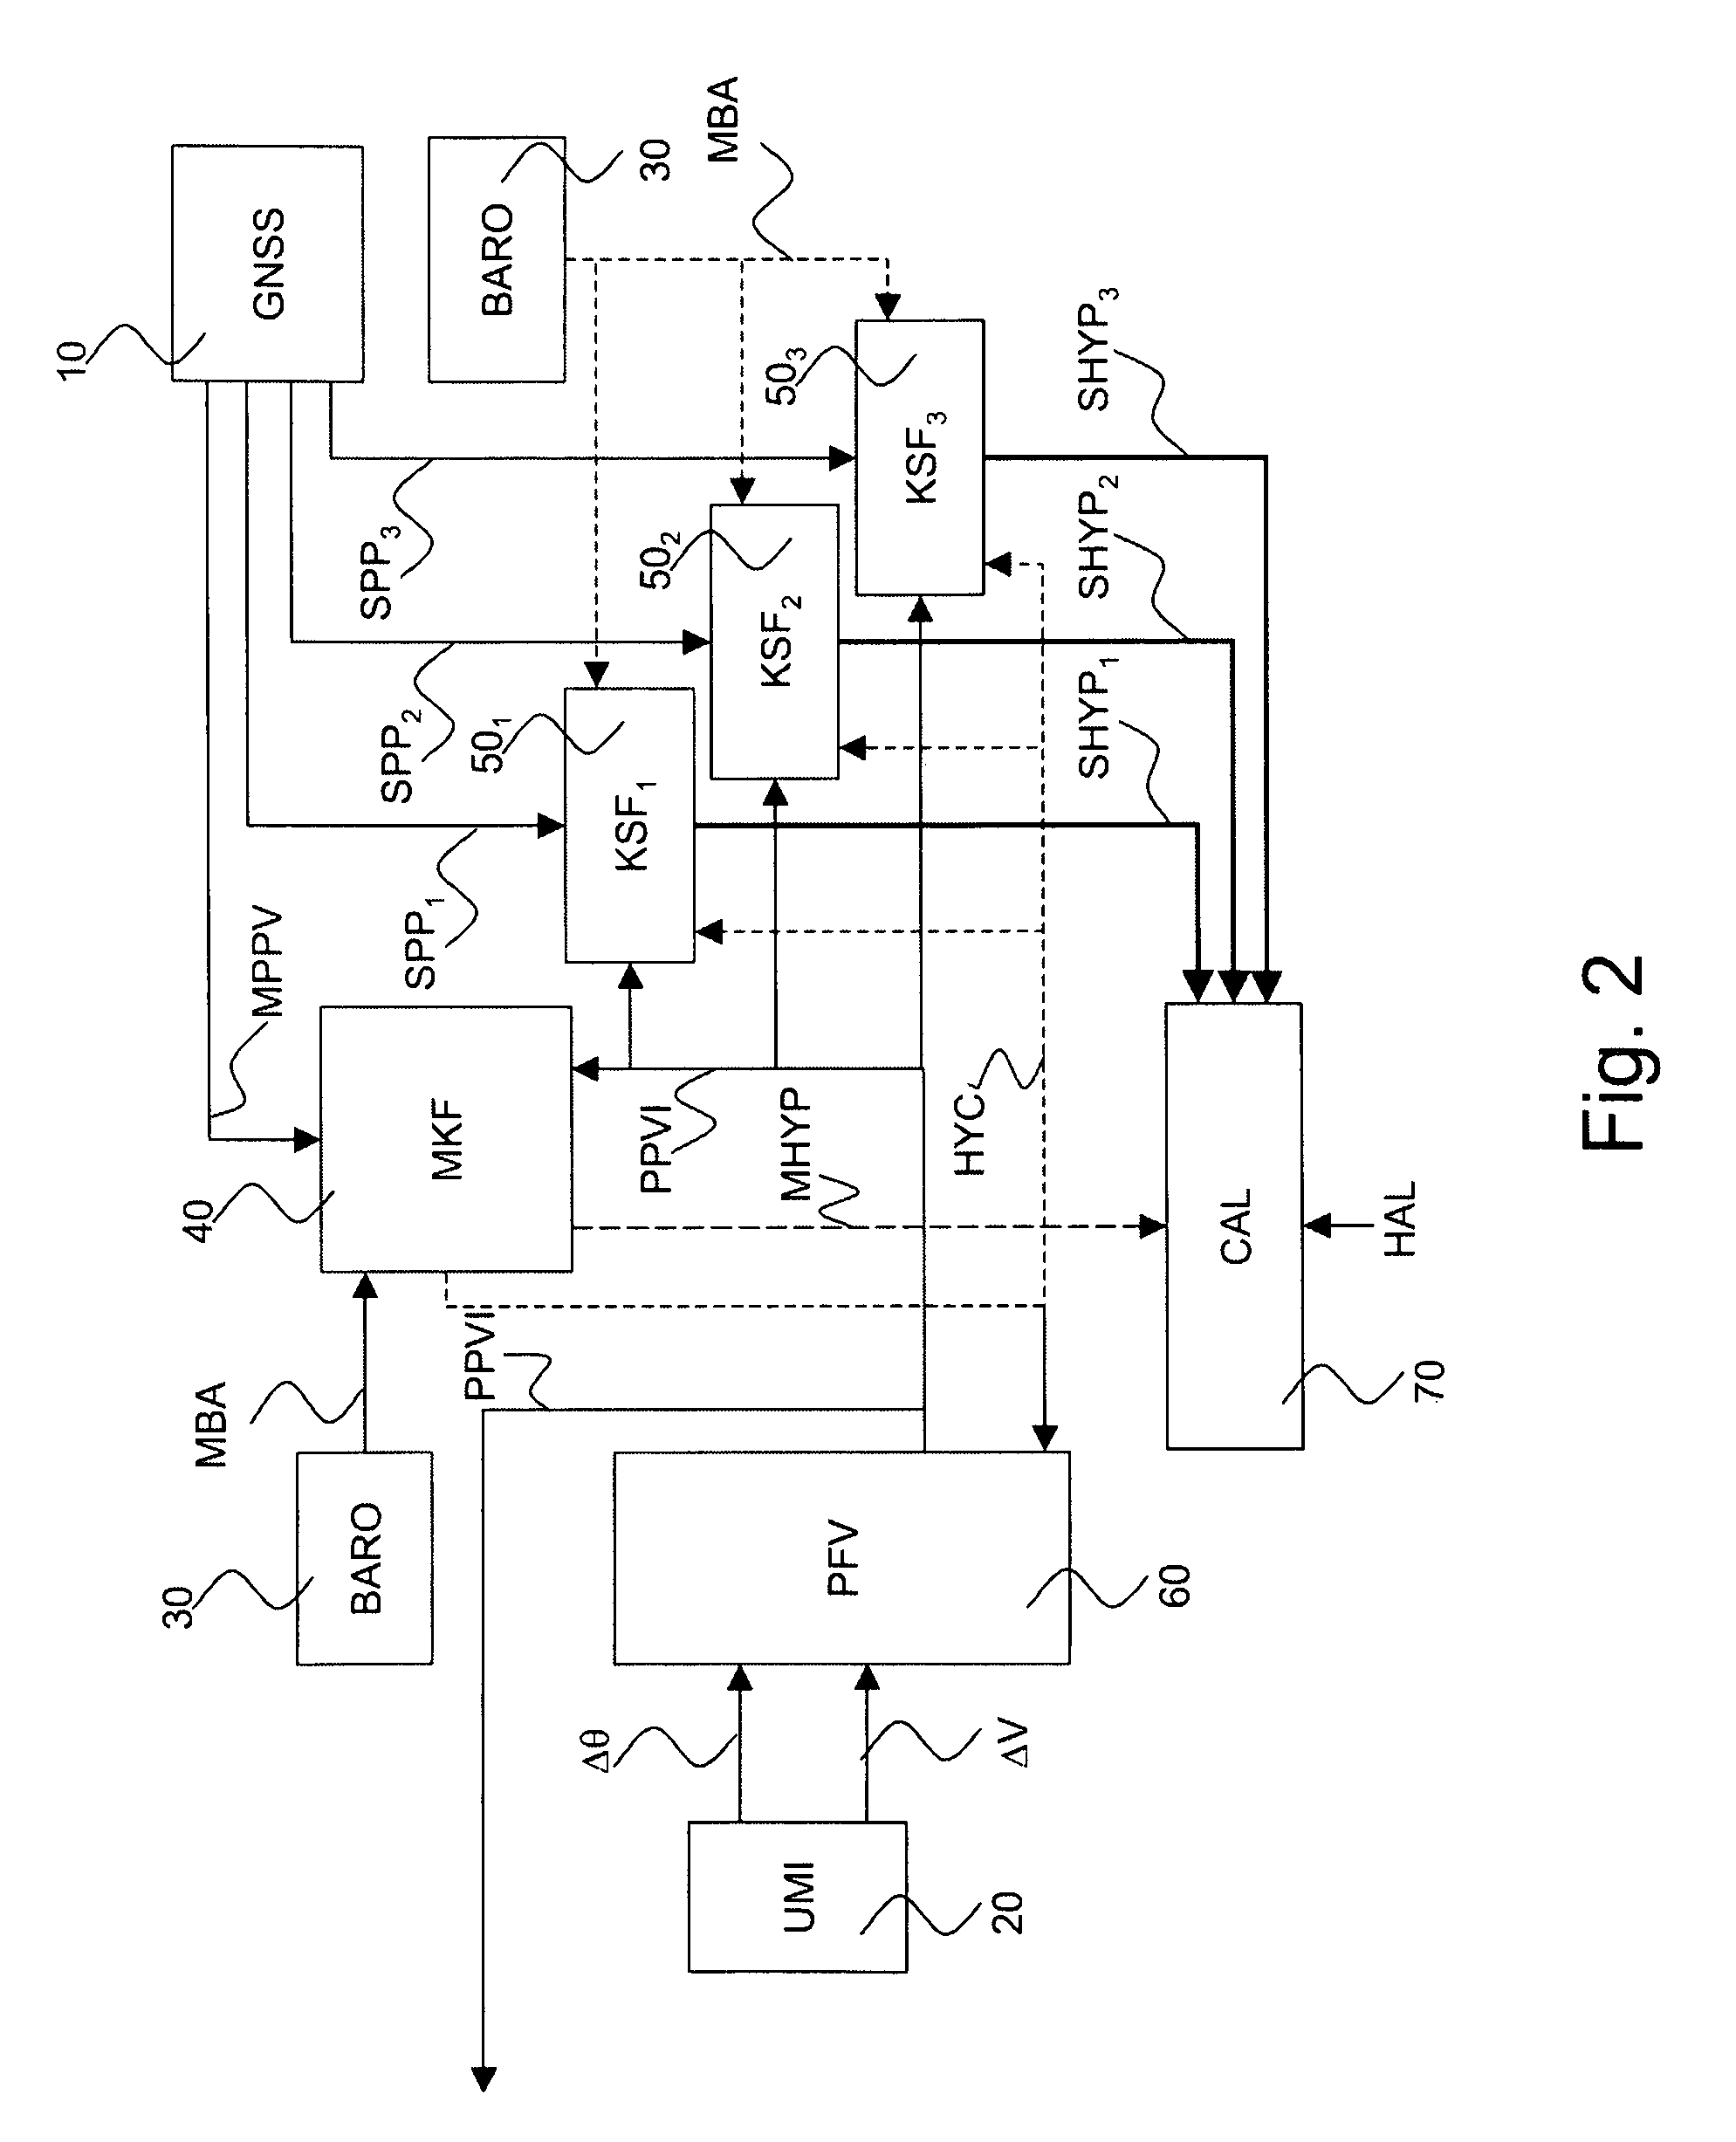 Hybrid INS/GNSS system with integrity monitoring and method for integrity monitoring